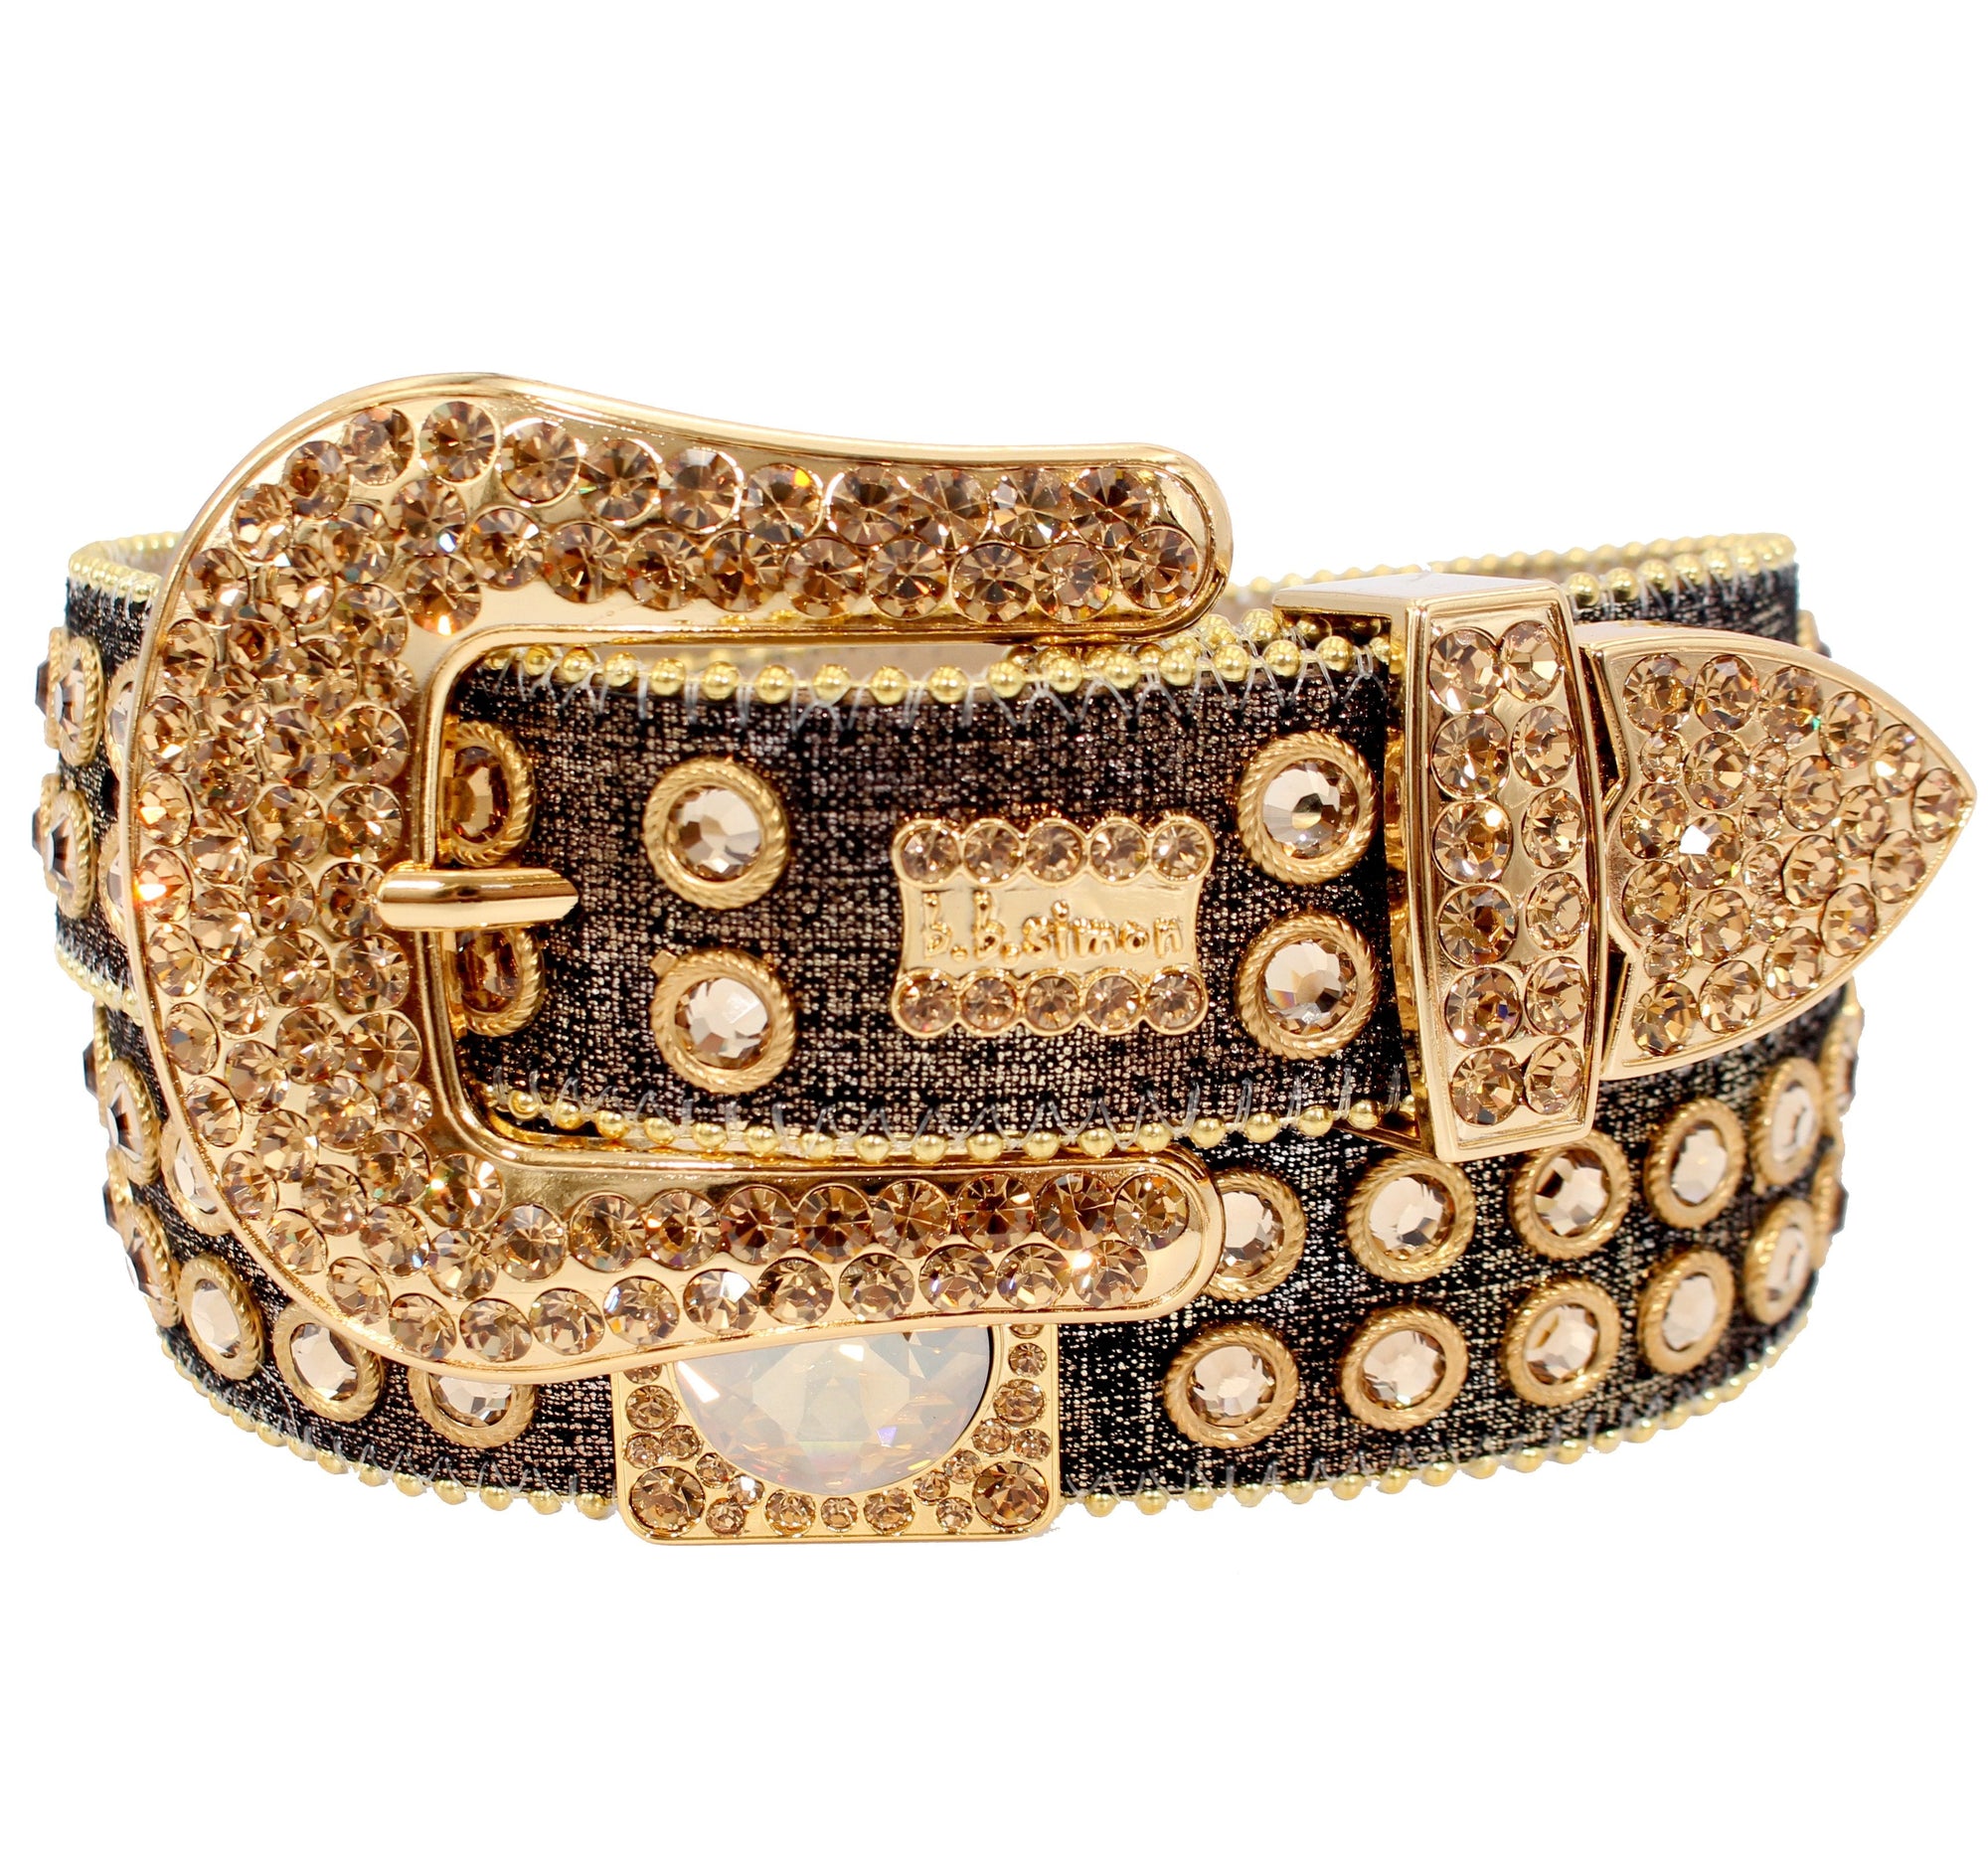 Brown Glitter B.B. Simon Belt With Gold Crystals